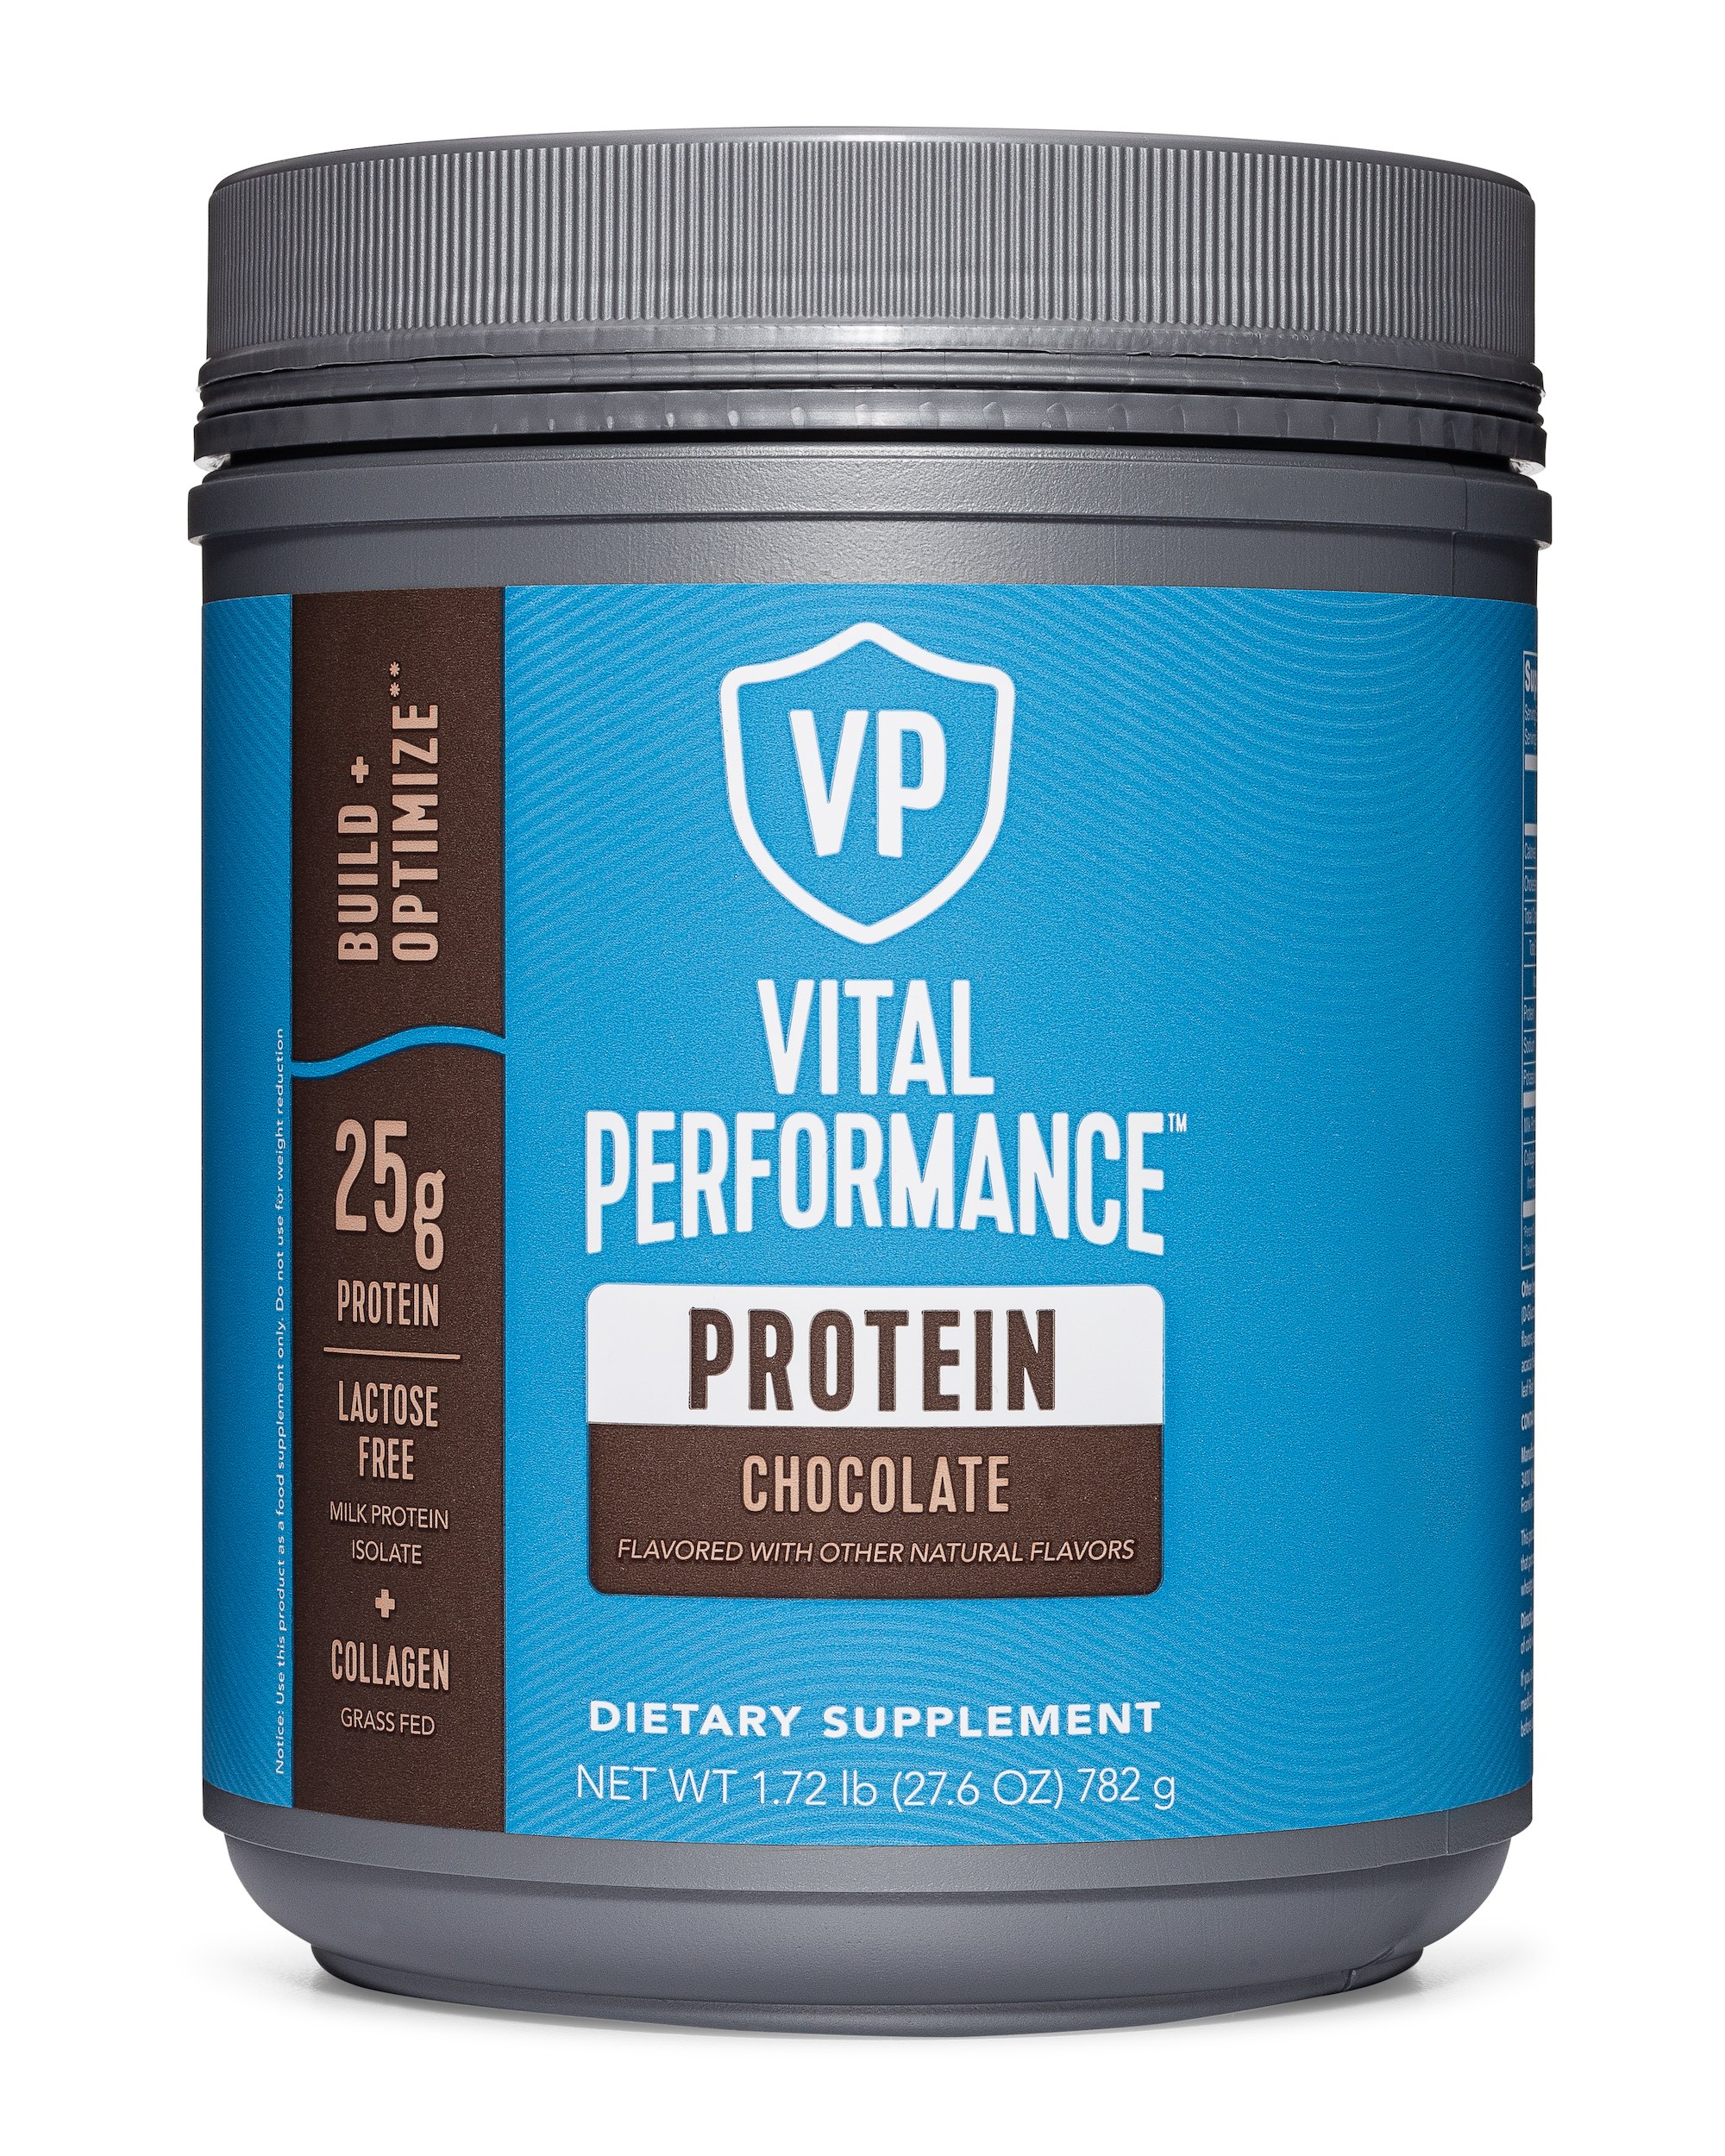 Vital Proteins Performance Protein Powder, Chocolate, 27.6 oz, Protein Supplement - image 1 of 9